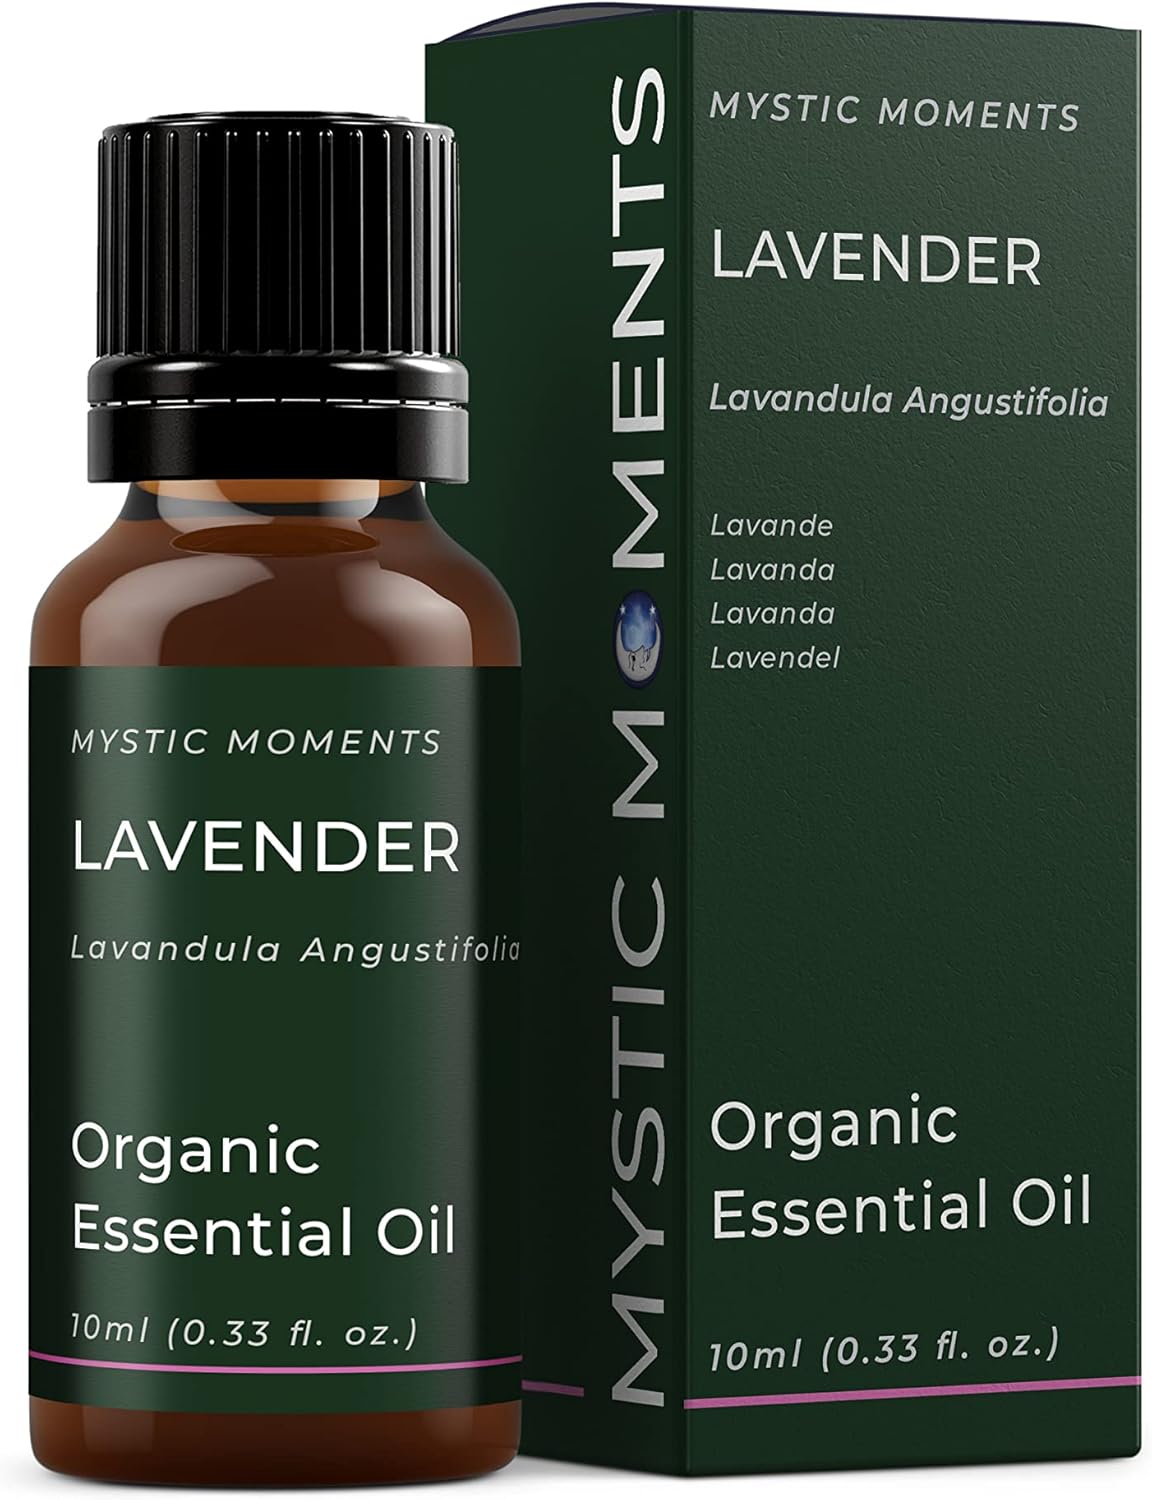 Mystic Moments | Organic Lavender Essential Oil 10ml - Pure & Natural oil for Diffusers, Aromatherapy & Massage Blends Vegan GMO Free